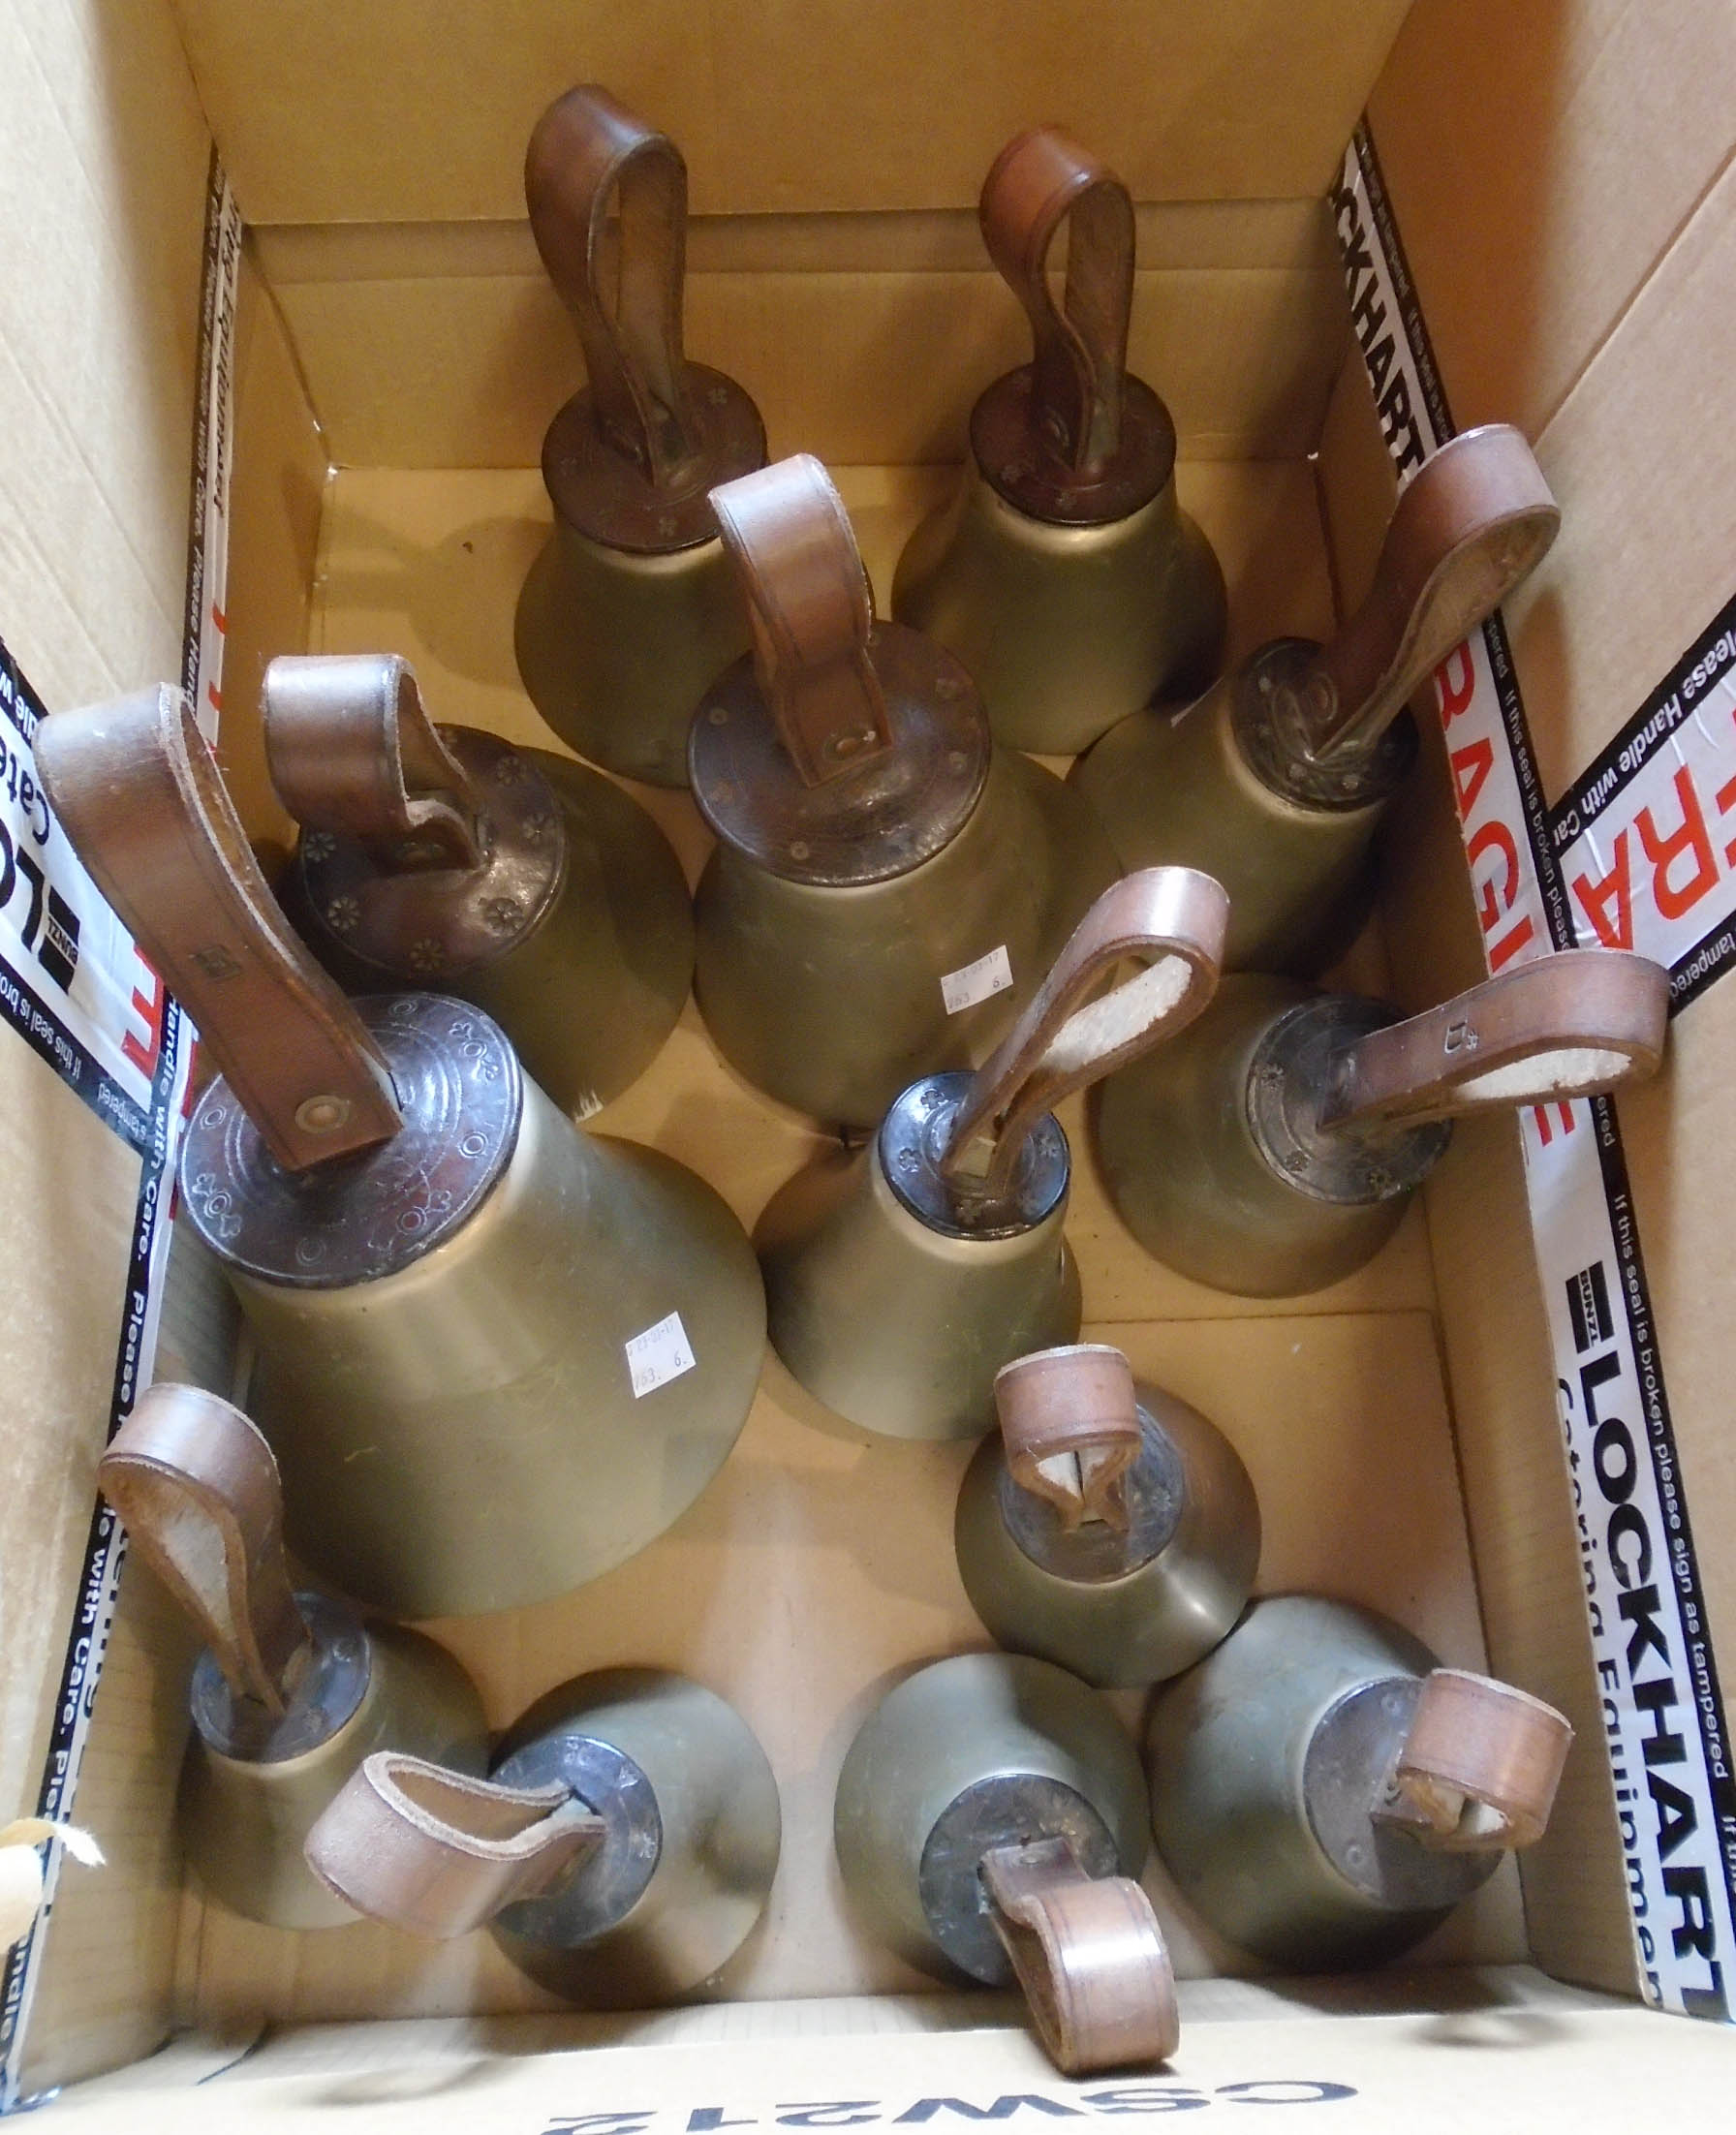 A box containing thirteen consecutive tuned bell metal handbells with embossed leather handles,